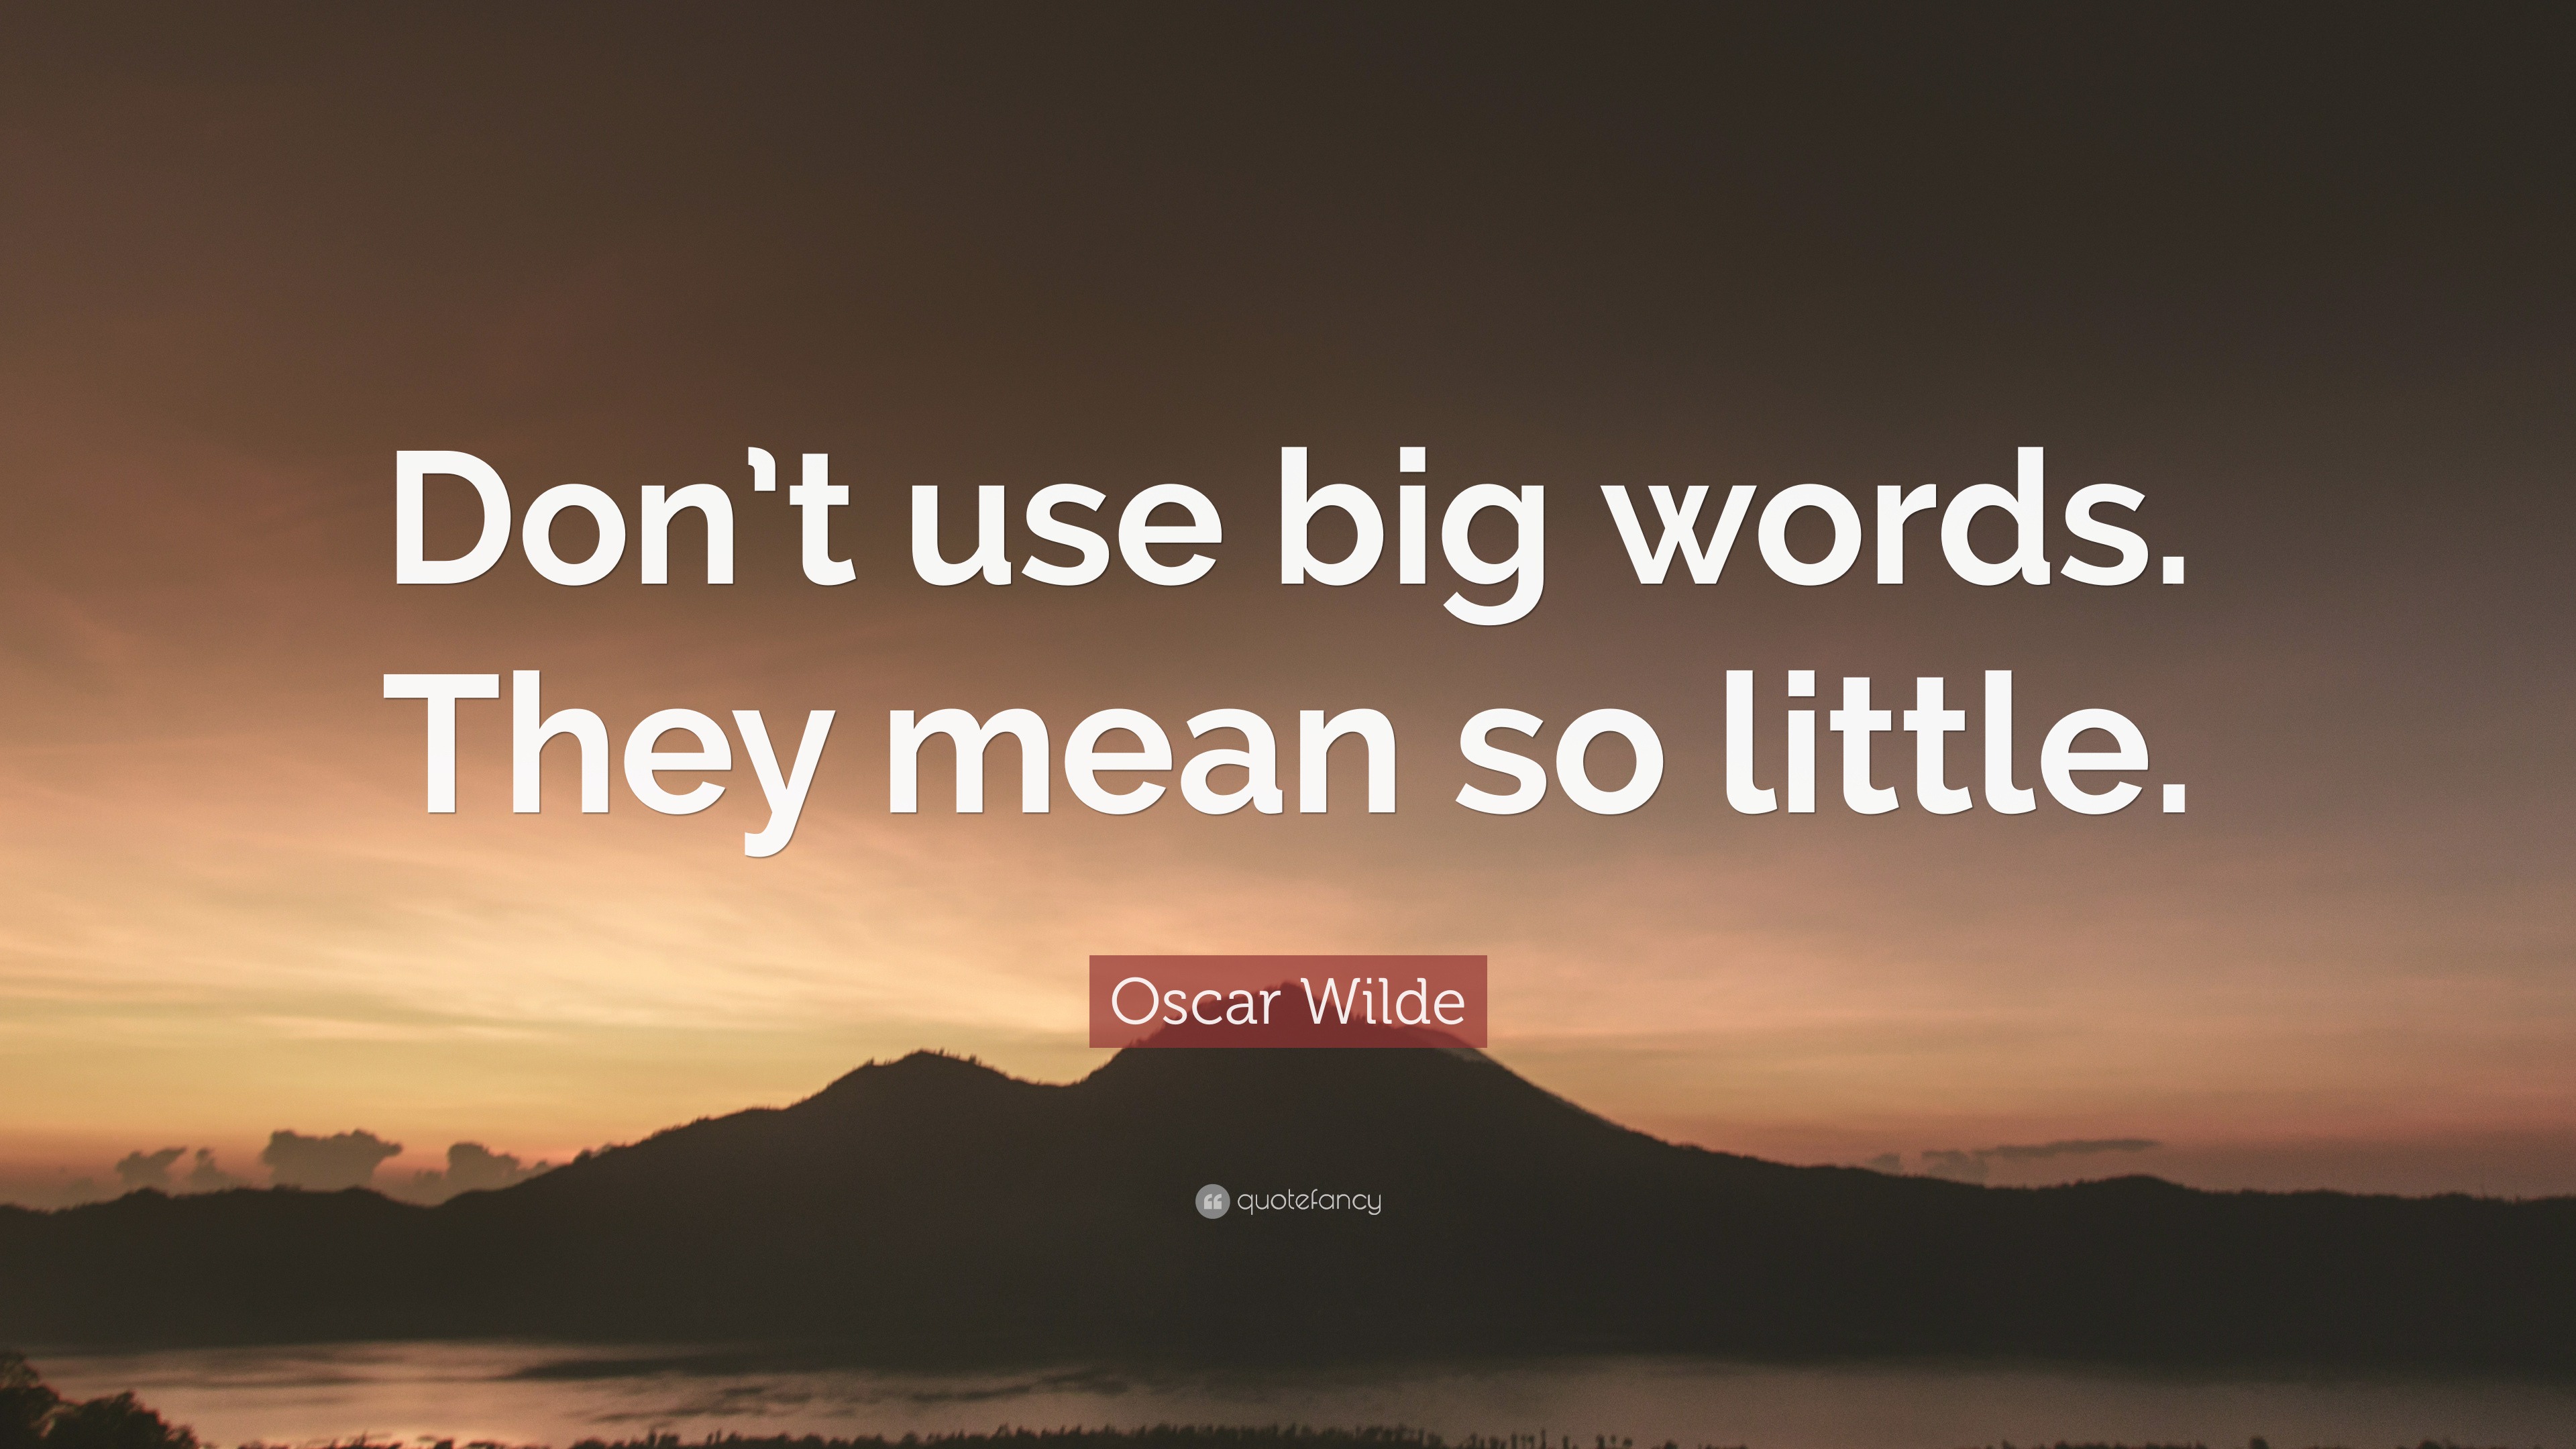 Oscar Wilde Quote: “Don't use big words. They mean so little.” (7  wallpapers) - Quotefancy